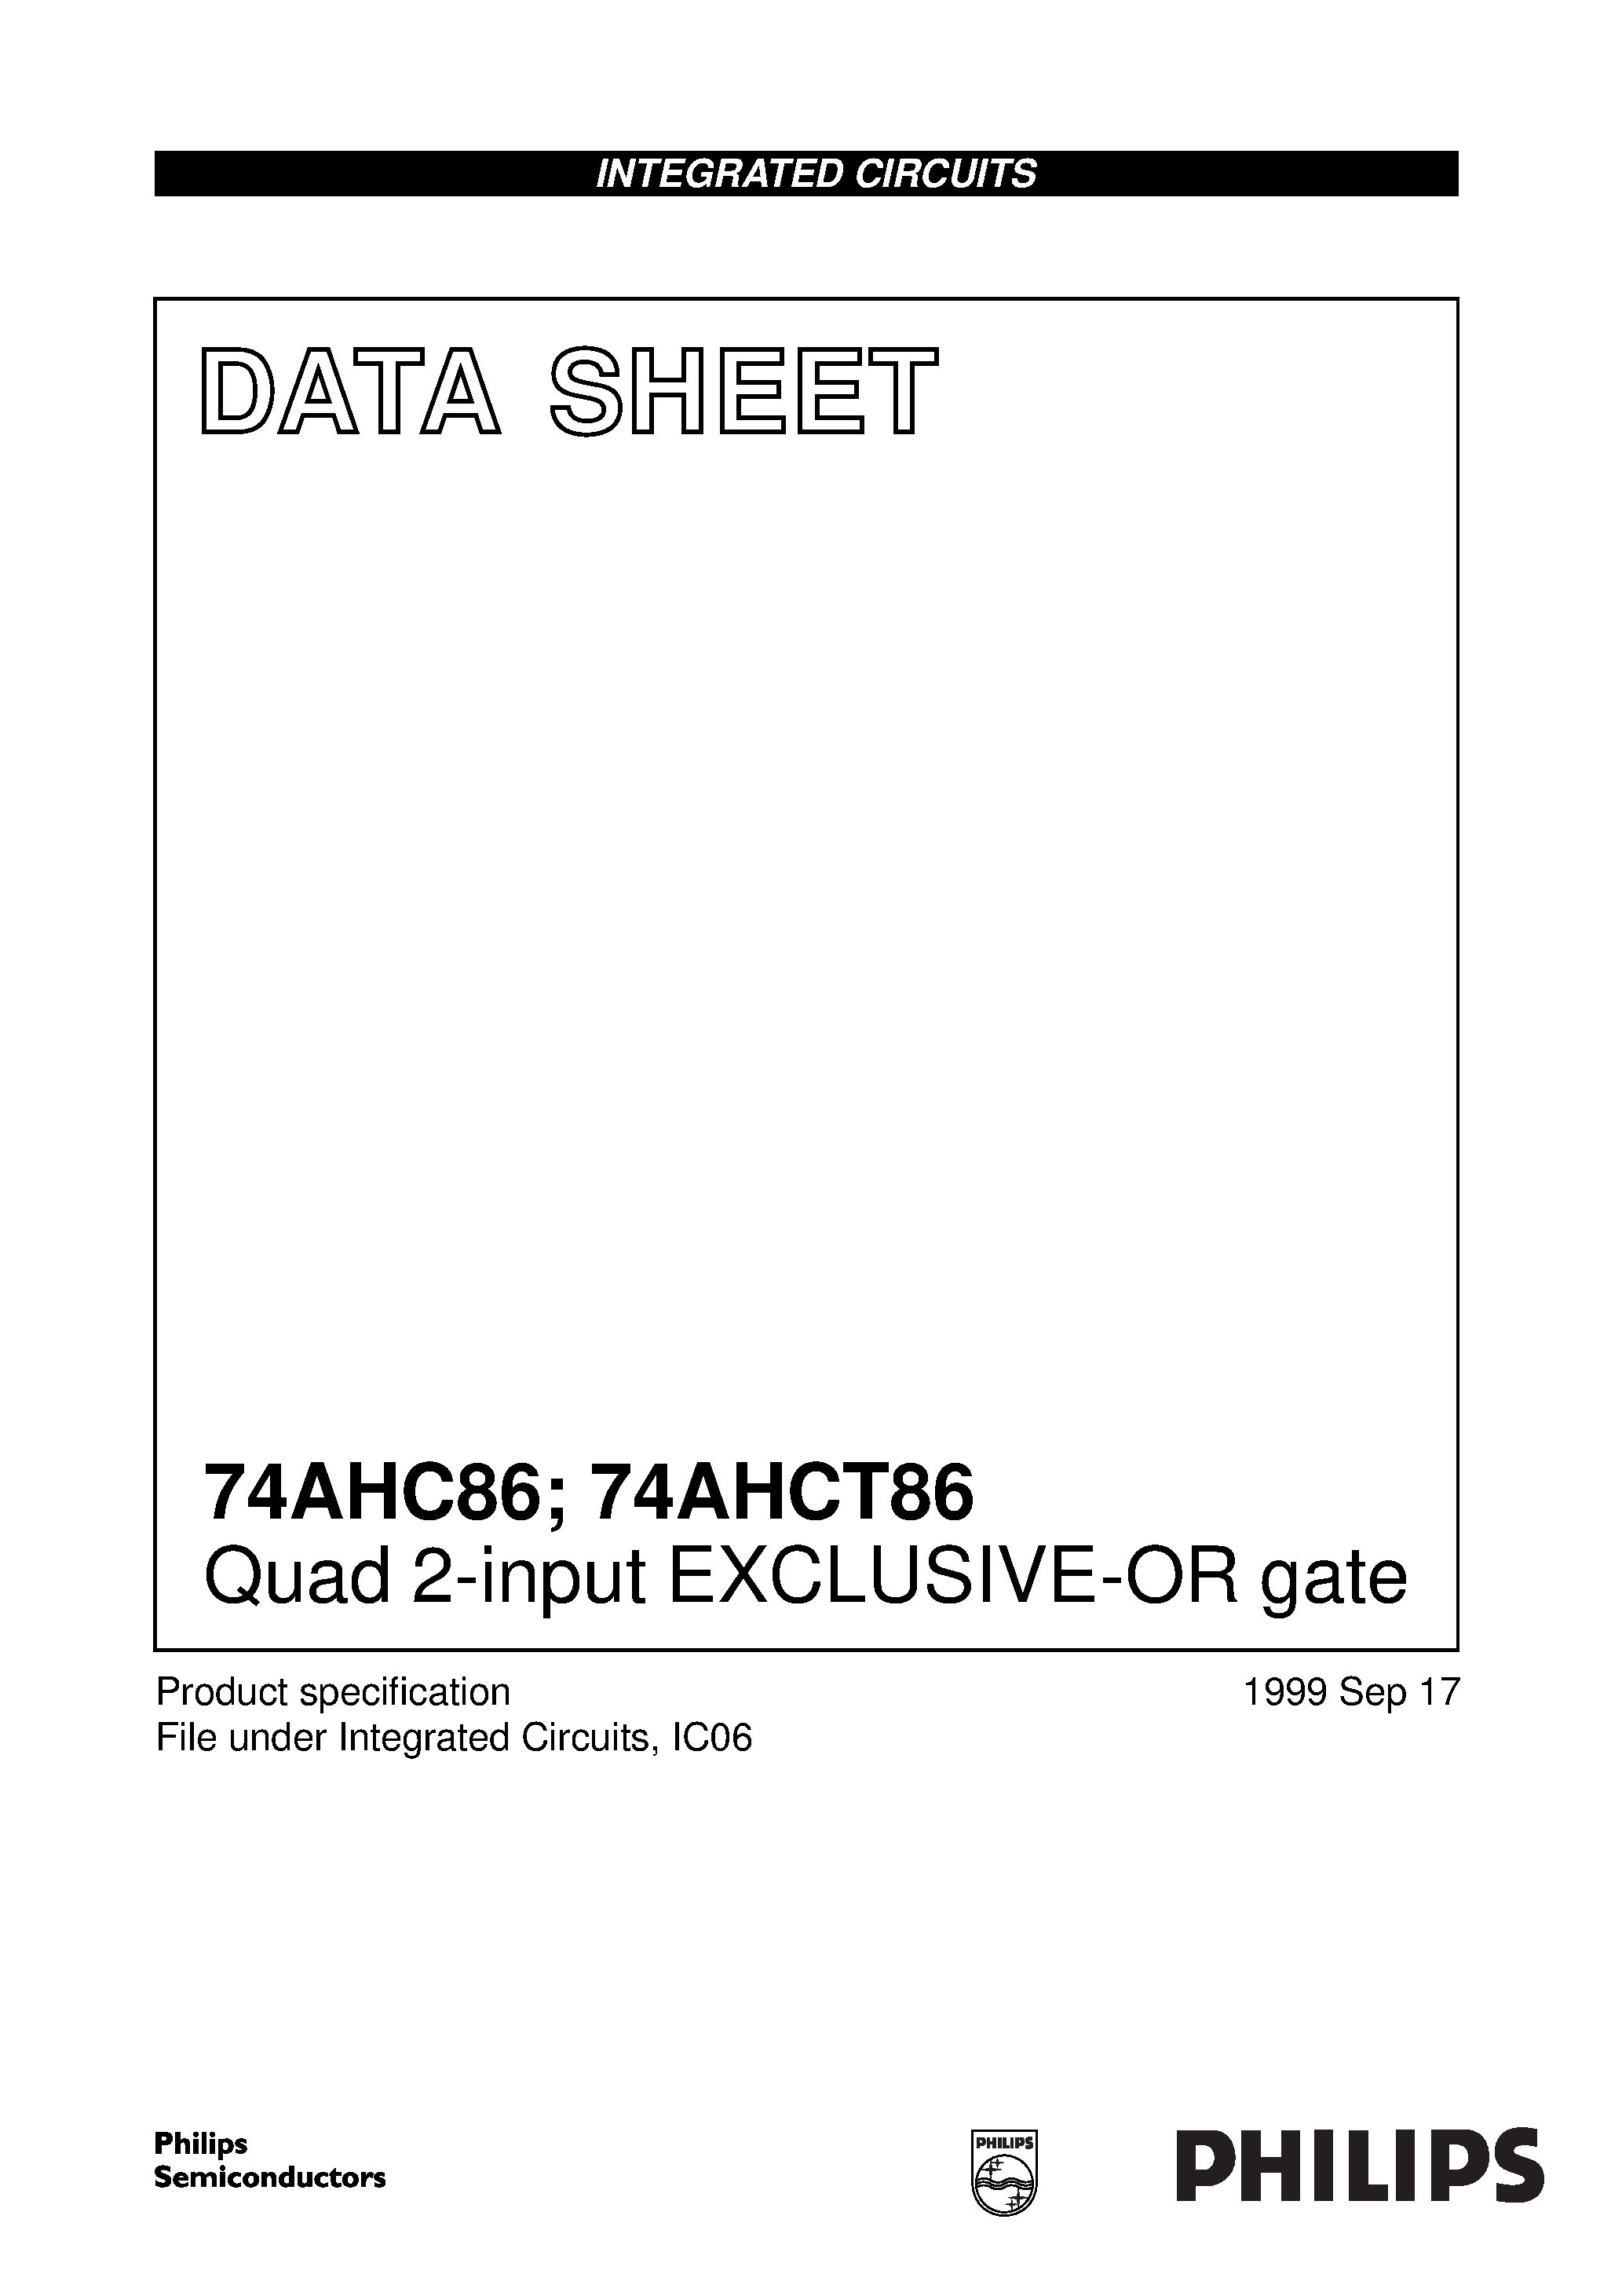 Datasheet 74AHCT86 - Quad 2-input EXCLUSIVE-OR gate page 1